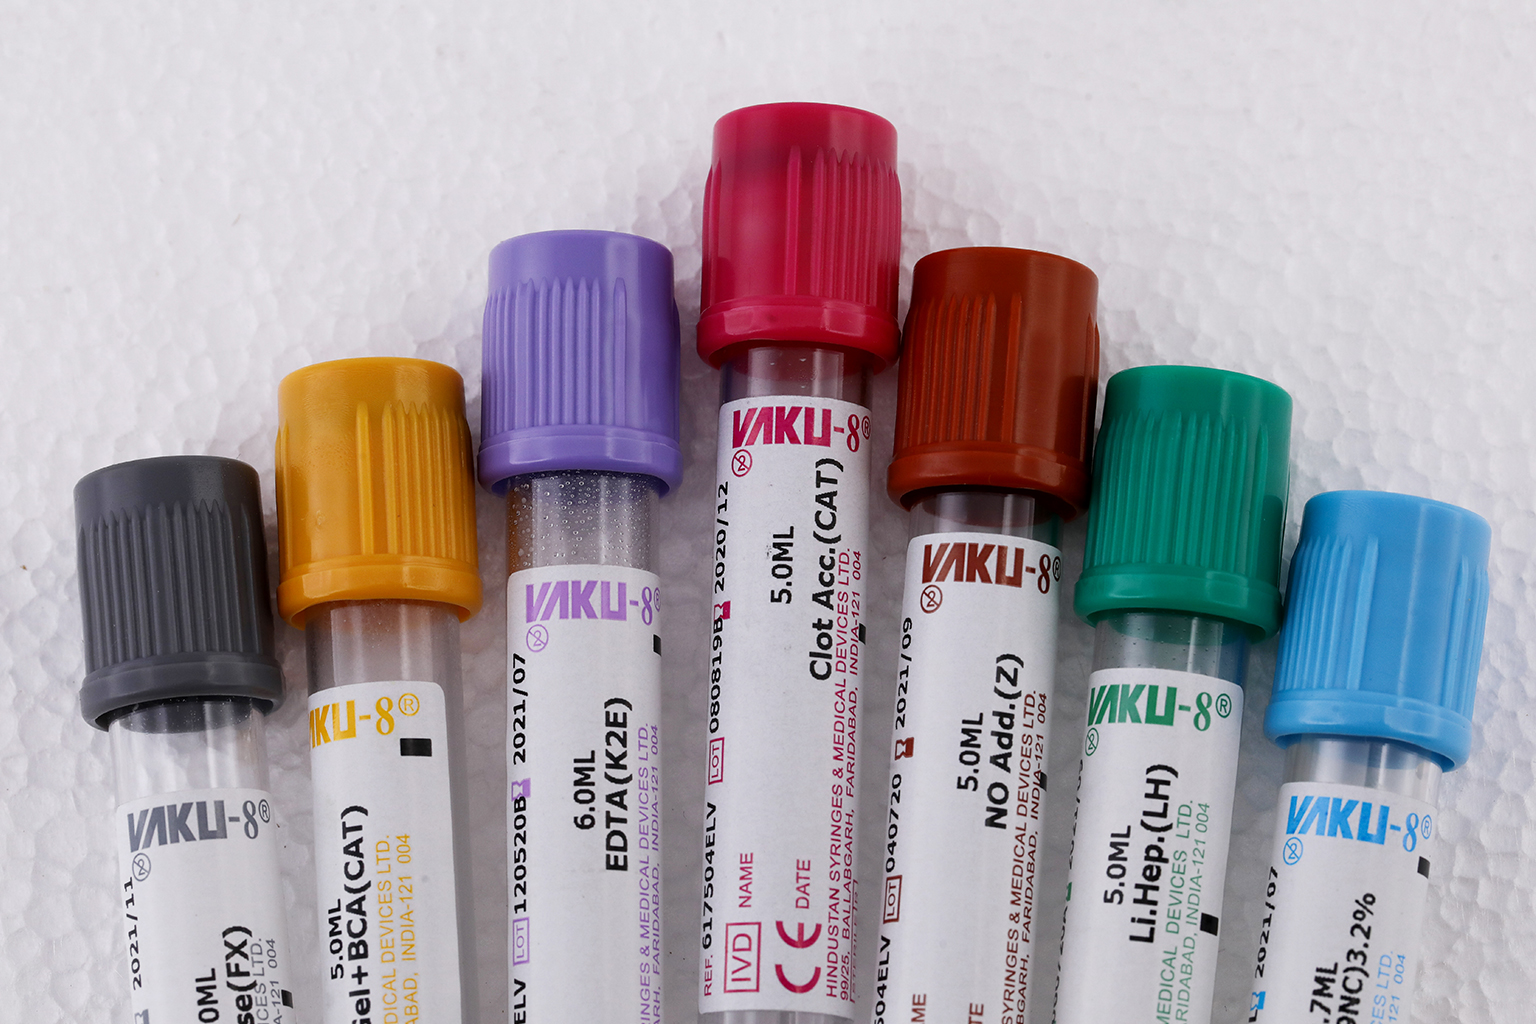 Colour Codes of Evacuated Blood Collection Tubes